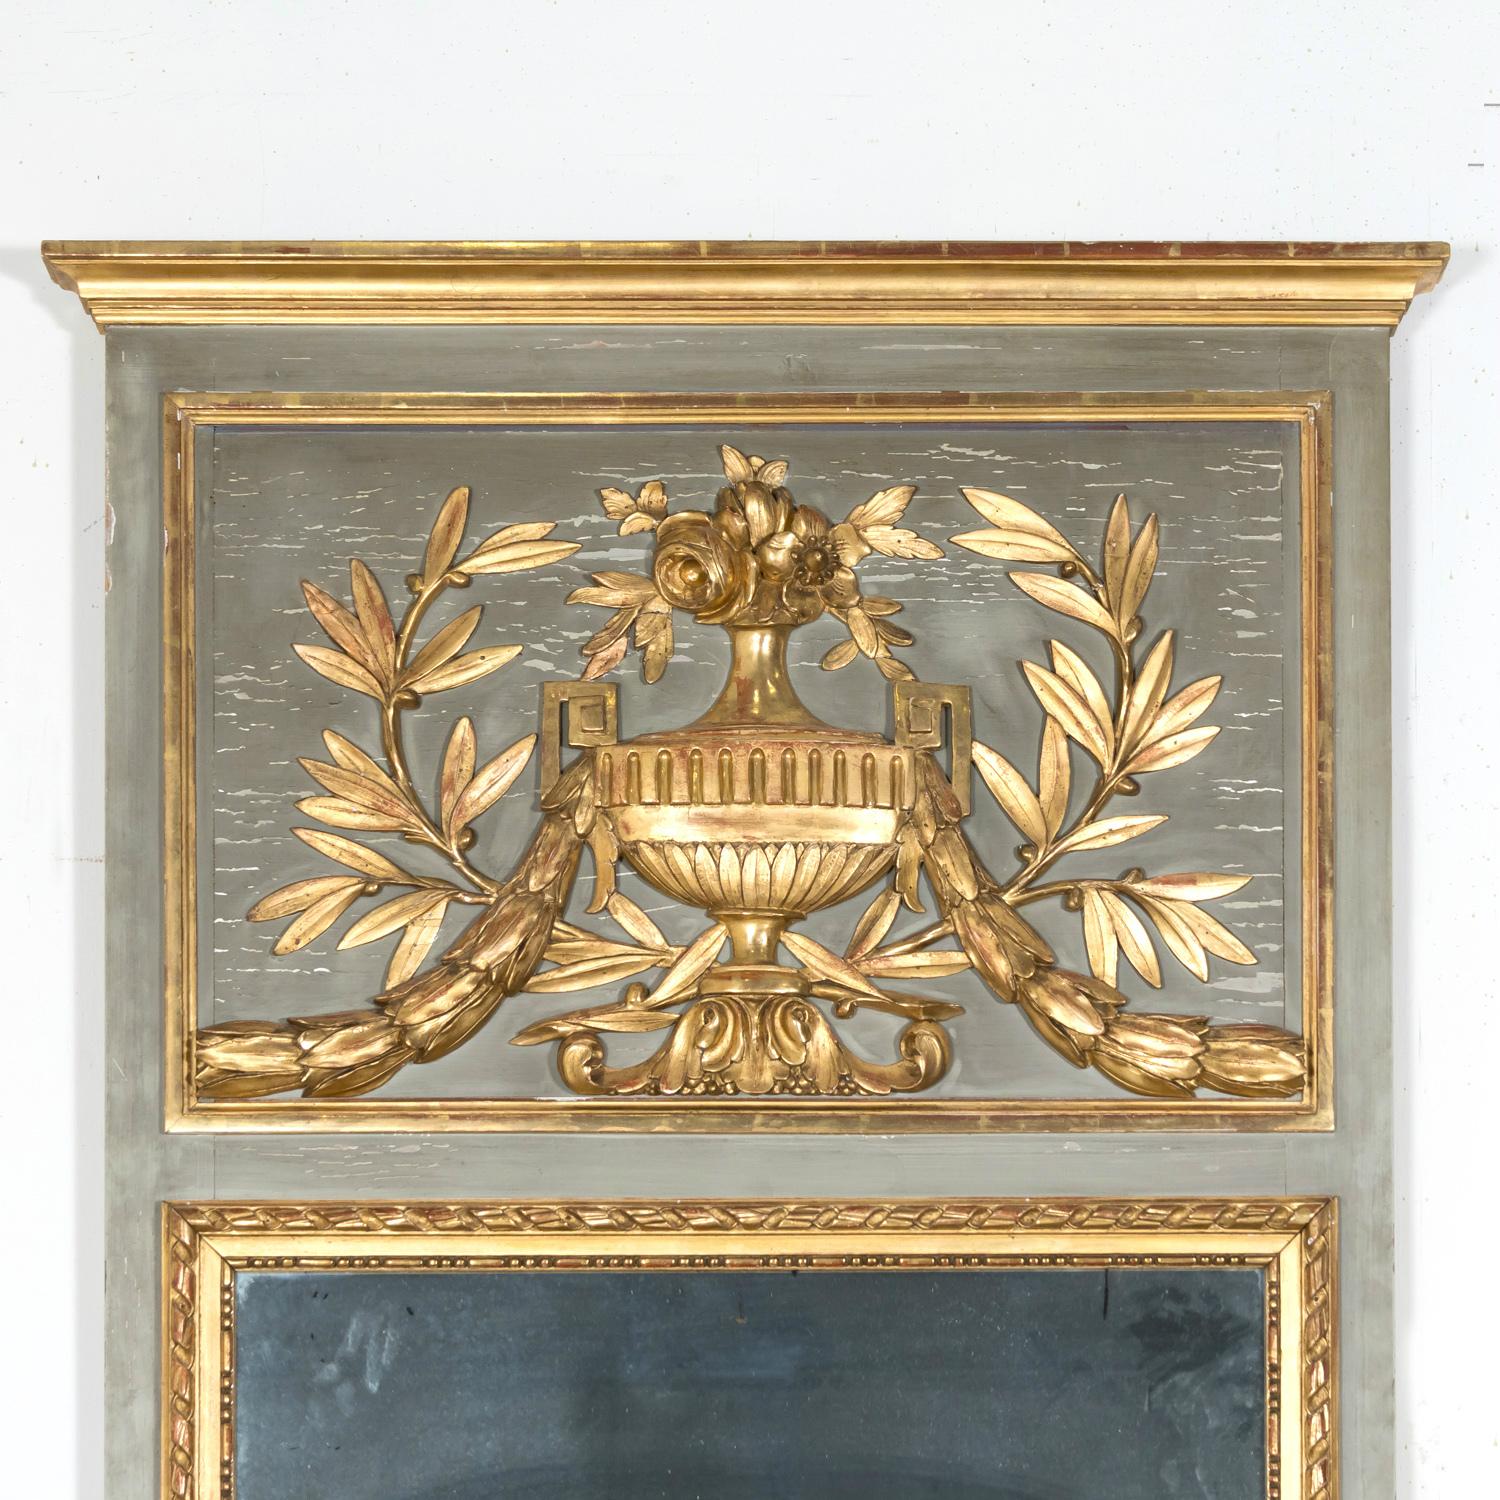 Hand-Crafted 19th Century French Louis XVI Style Painted and Parcel Gilt Trumeau Mirror